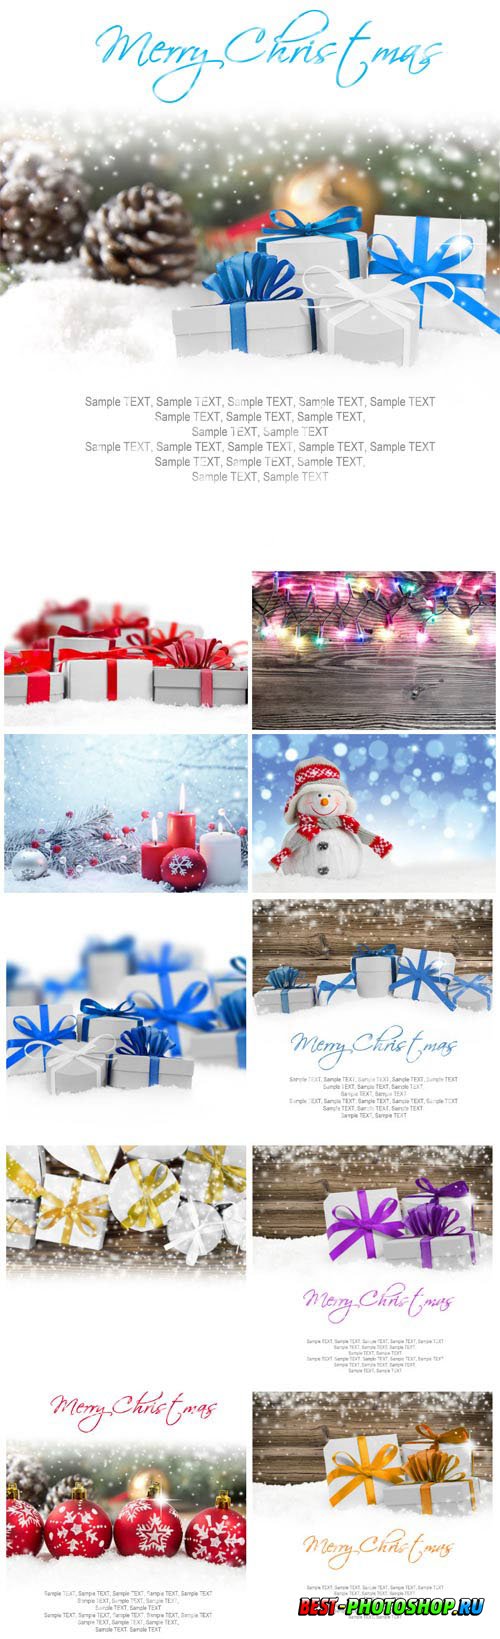 New Year and Christmas stock photos 18